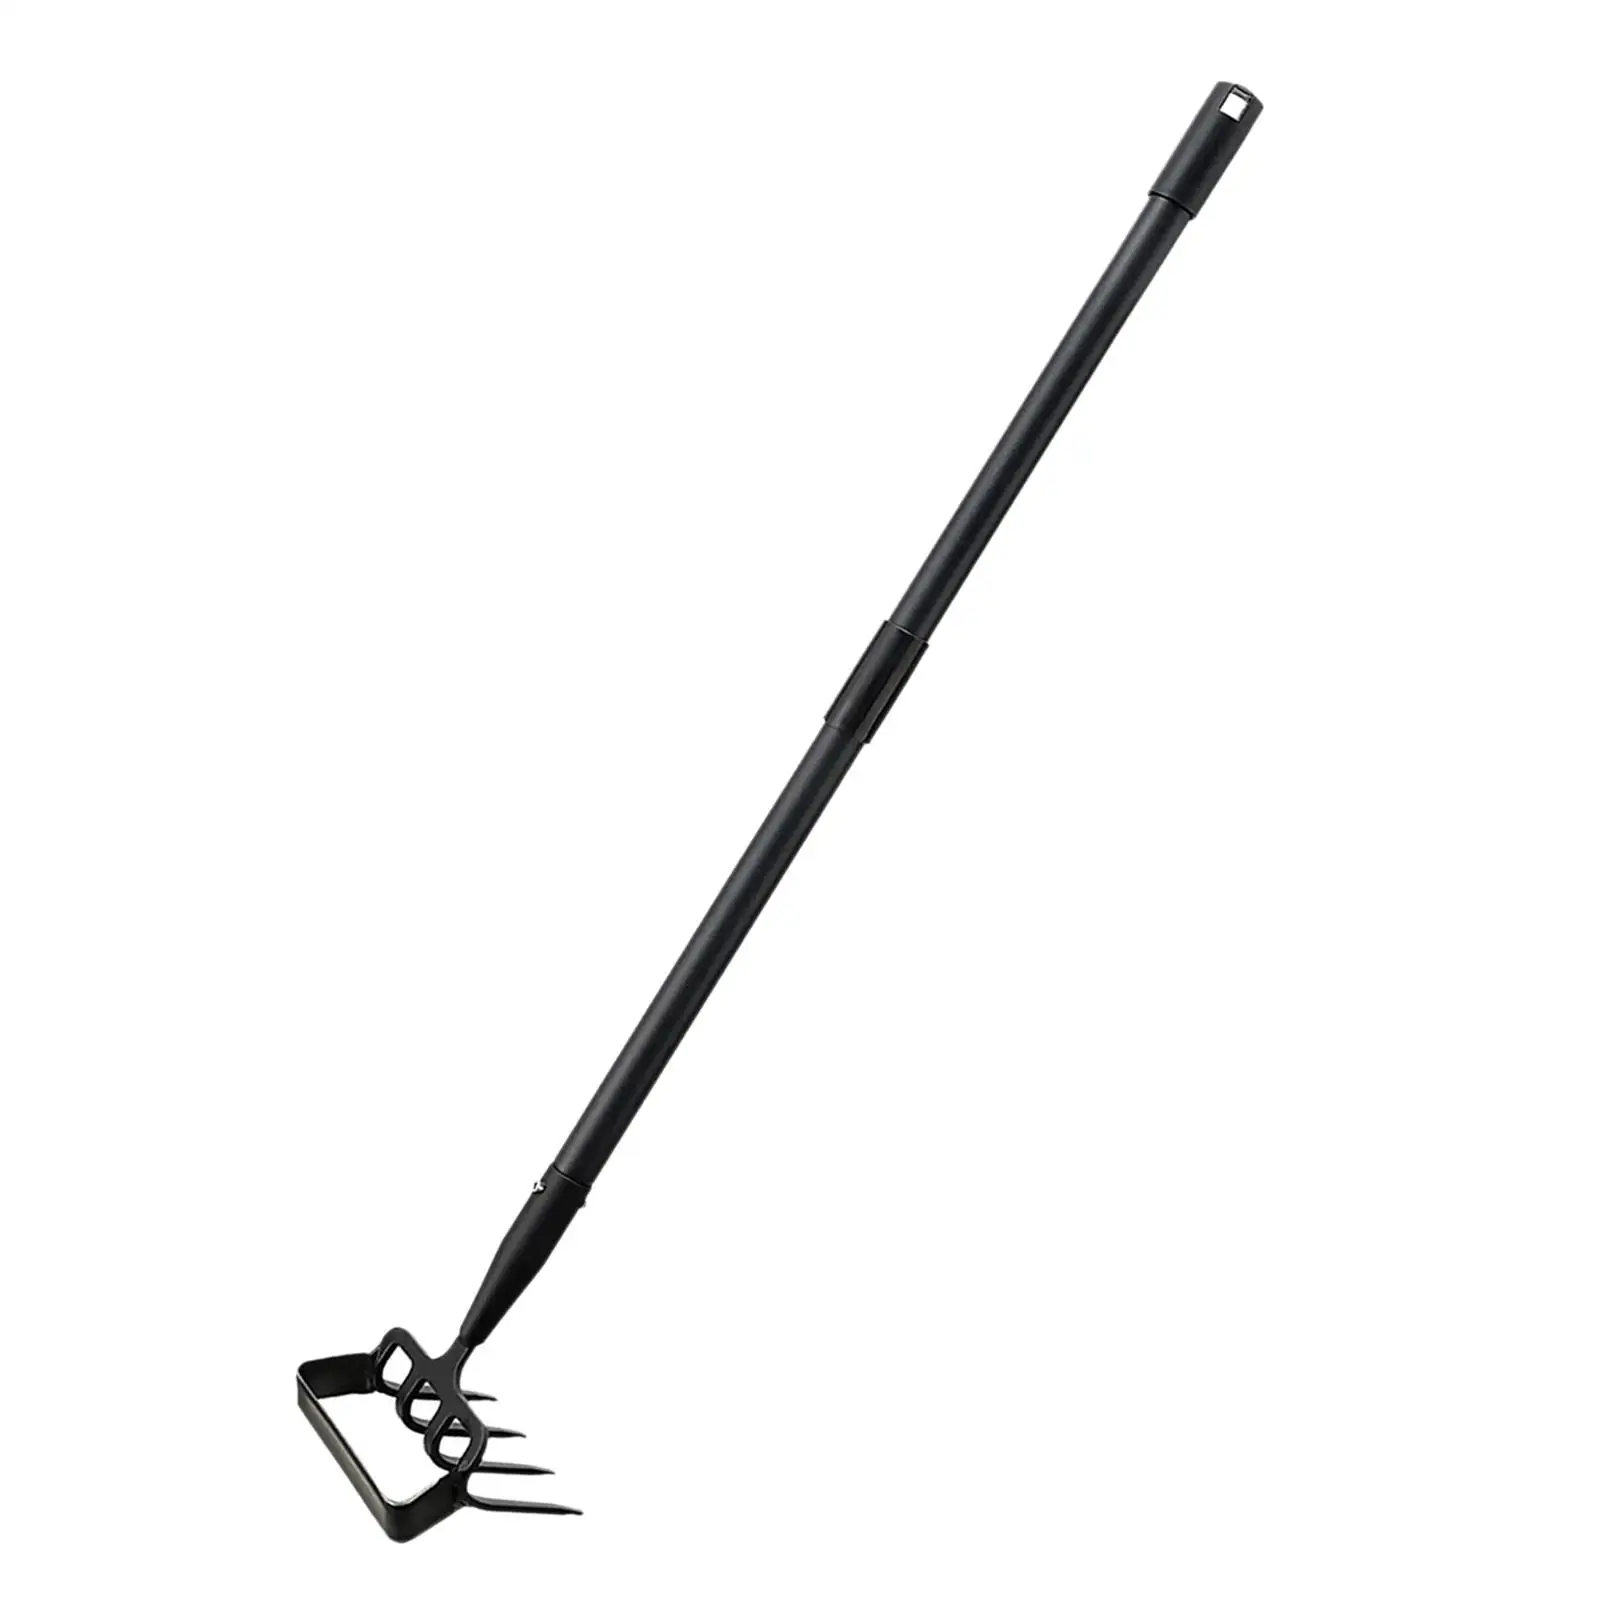 Garden Tool Gardening Agricultural Tools Dual Purpose Stirrup Hoe and Cultivator for Digging Planting Gardening Plowing Weeding